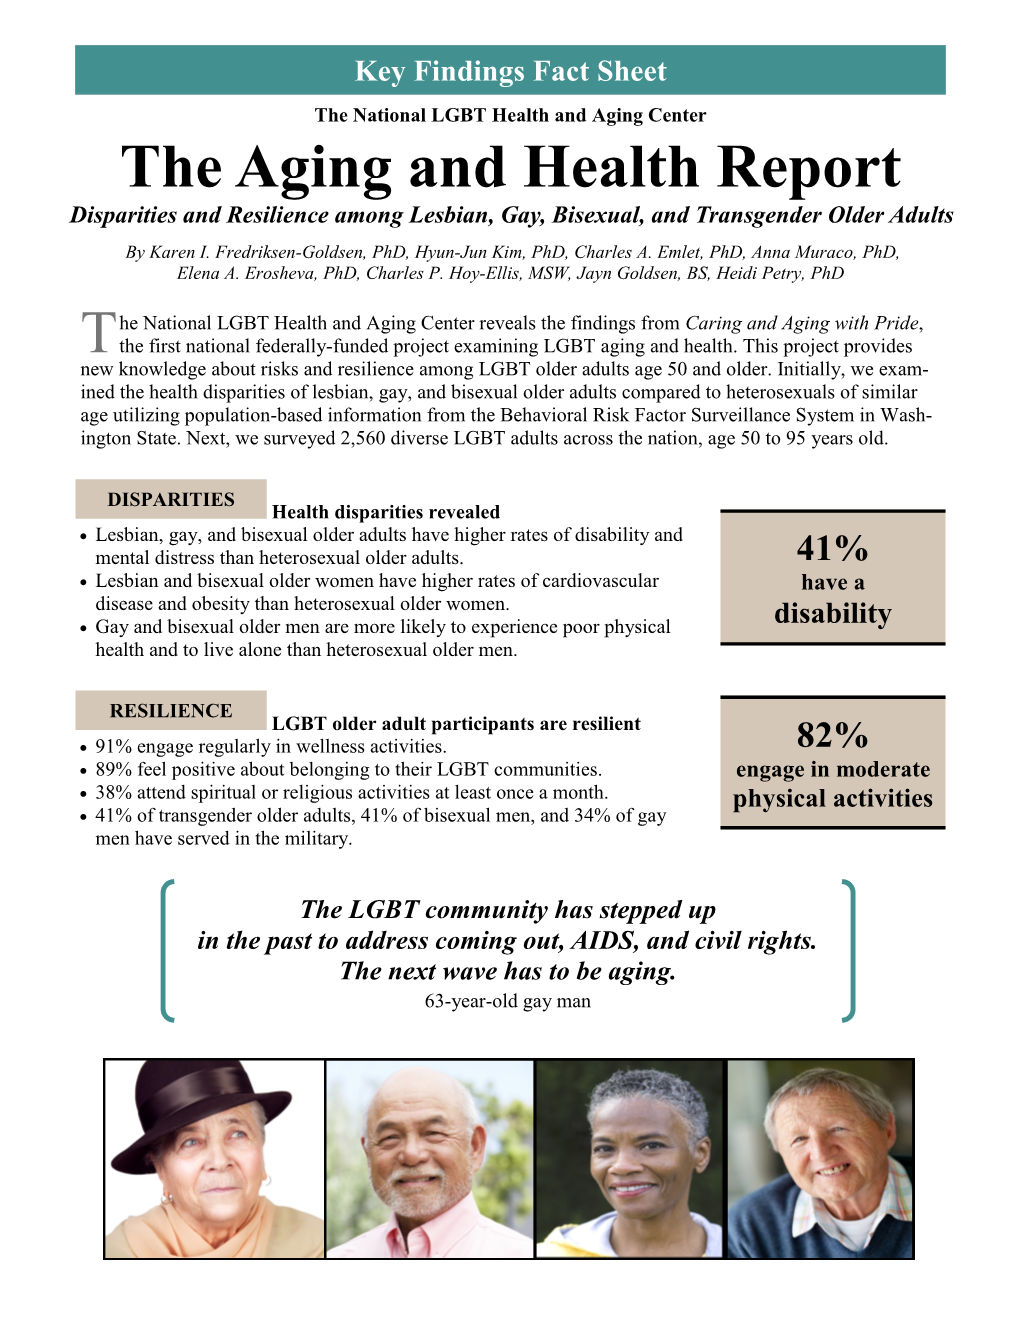 The Aging and Health Report